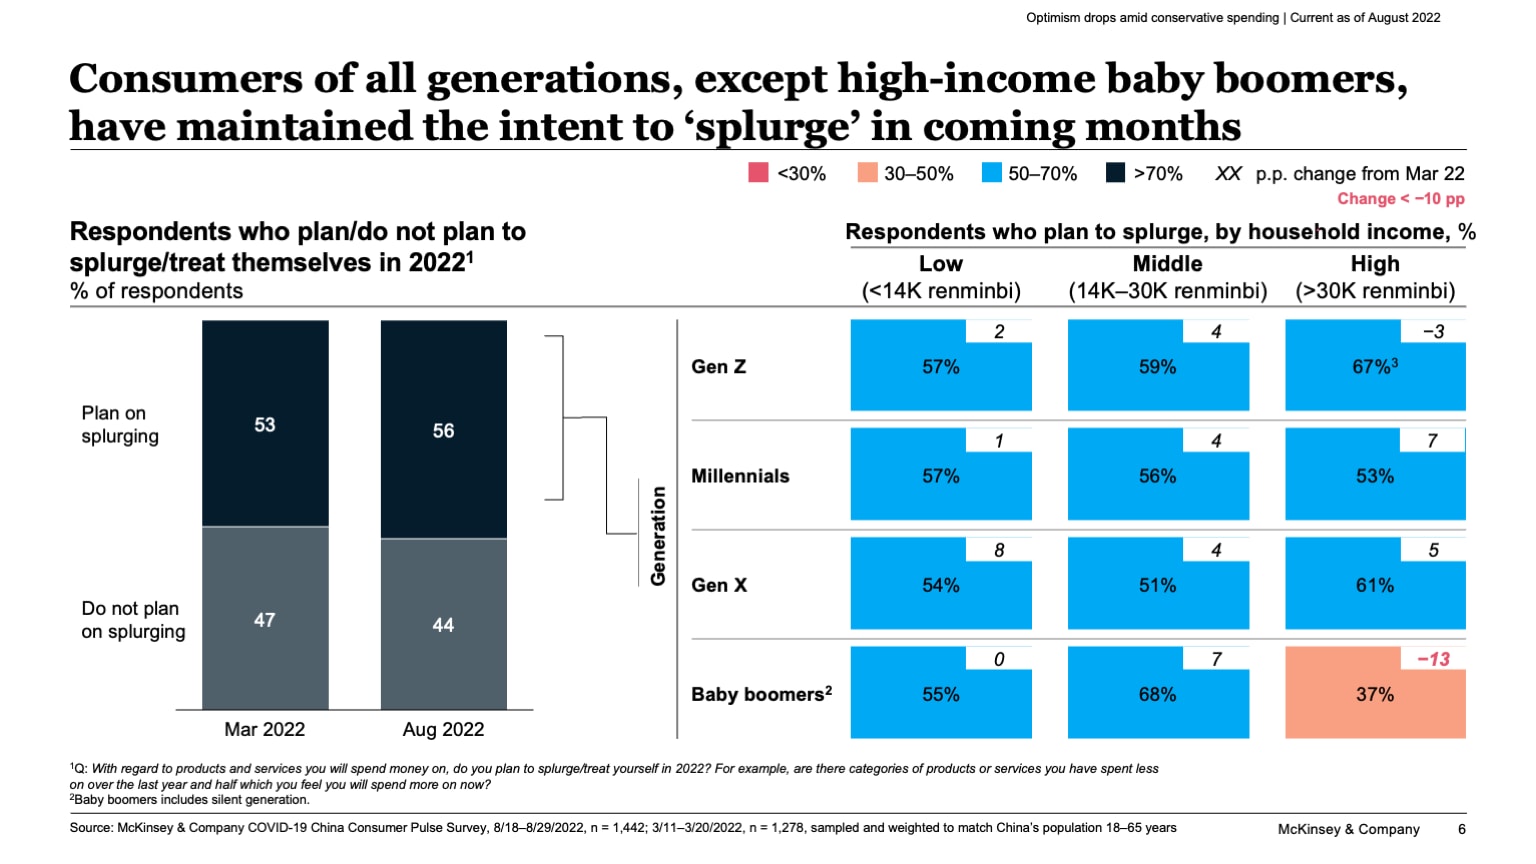 Consumers of all generations, except high-income baby boomers, have maintained the intent to ‘splurge’ in coming months